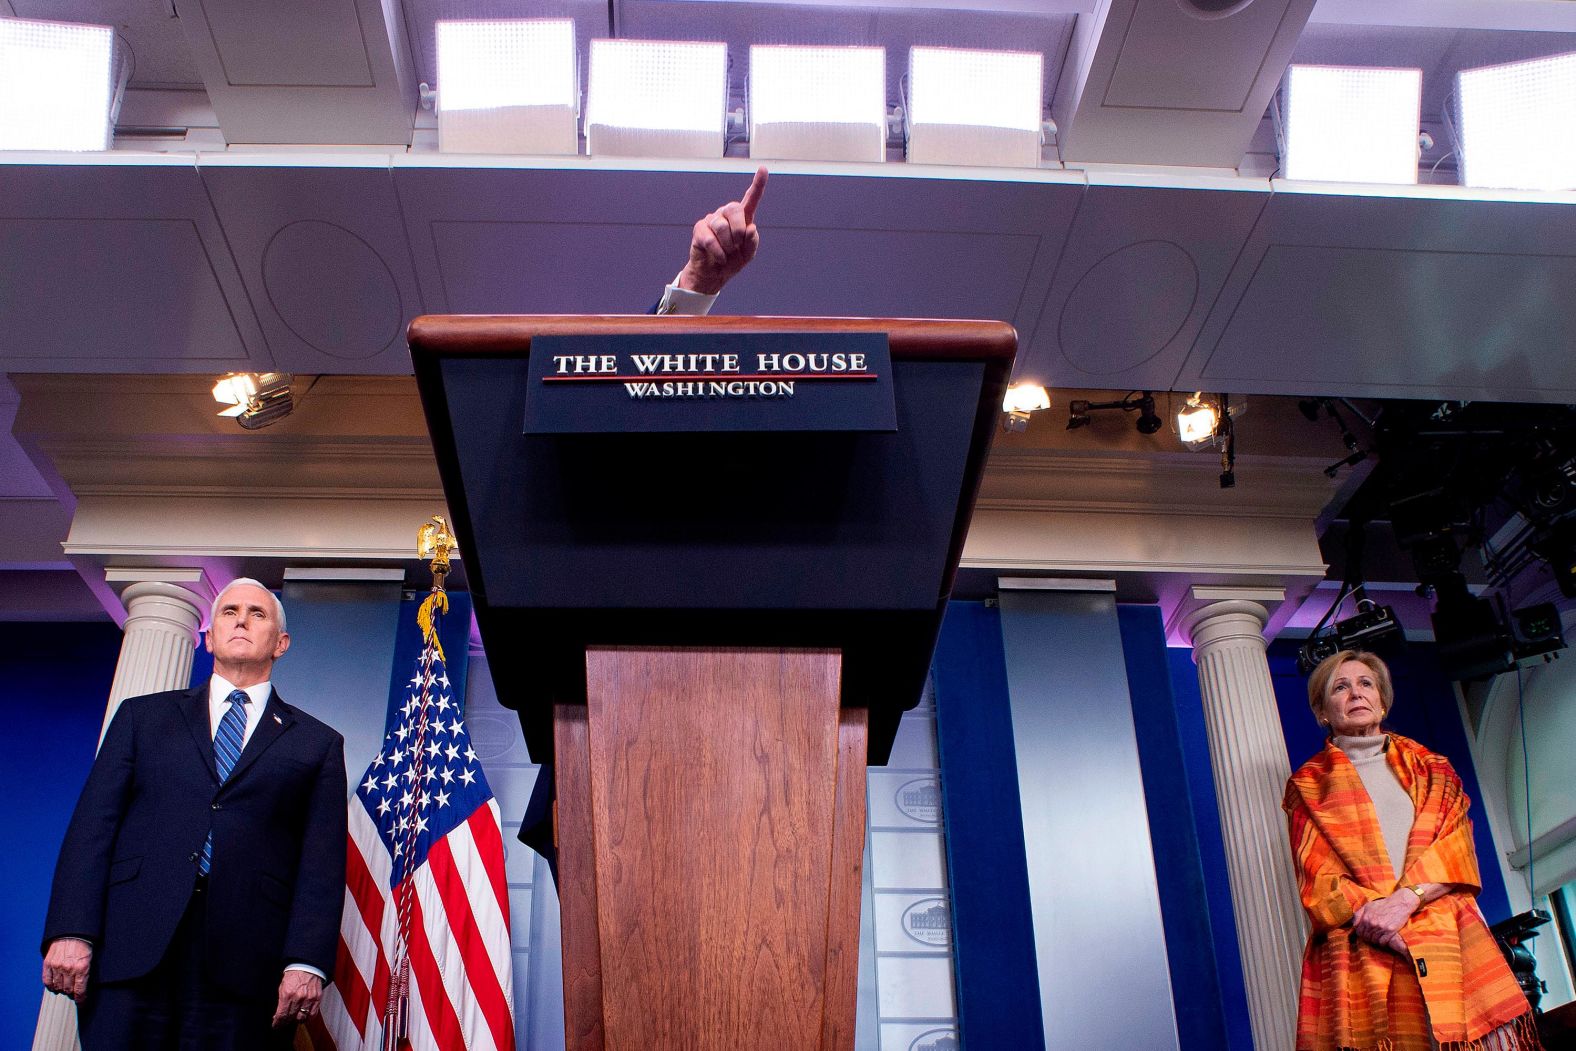 Trump — flanked by Vice President Mike Pence and Dr. Deborah Birx, the White House coronavirus response coordinator — gestures over the lectern as he speaks on April 3. <a href="https://twitter.com/weijia/status/1246213280839933952" target="_blank" target="_blank">Weijia Jiang of CBS News asked Trump</a> to clarify what his son-in-law Jared Kushner meant by the word "our" at the previous day's briefing when he said: "the notion of the federal stockpile was it's supposed to be our stockpile — it's not supposed to be state stockpiles that they then use." Trump responded: "You know what 'our' means? The United States of America — that's what it means. ... And then we take that 'our' and we distribute it to the states." He also added: "It's such a basic, simple question and you try and make it sound so bad. You ought to be ashamed of yourself."